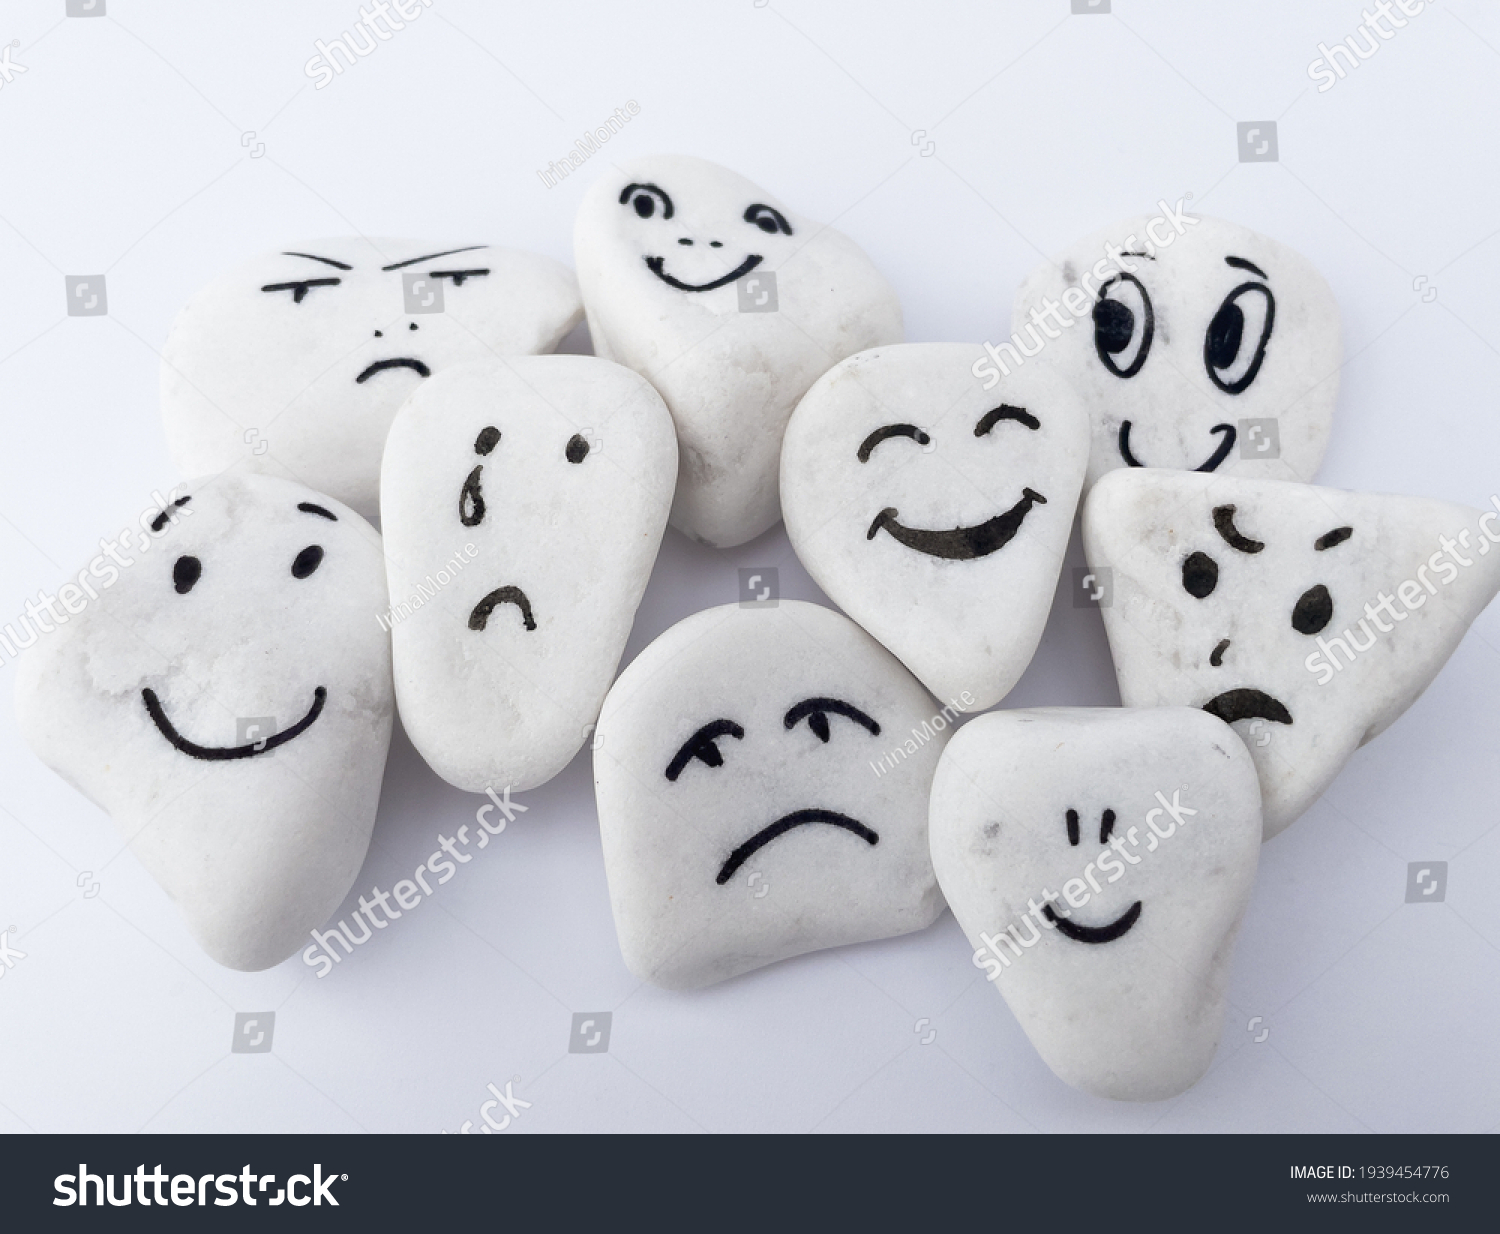 Emotion management concept, stones with painted faces symbolize different emotions. We are all different, but all together, learning to manage emotions. Soft background, white stones. #1939454776